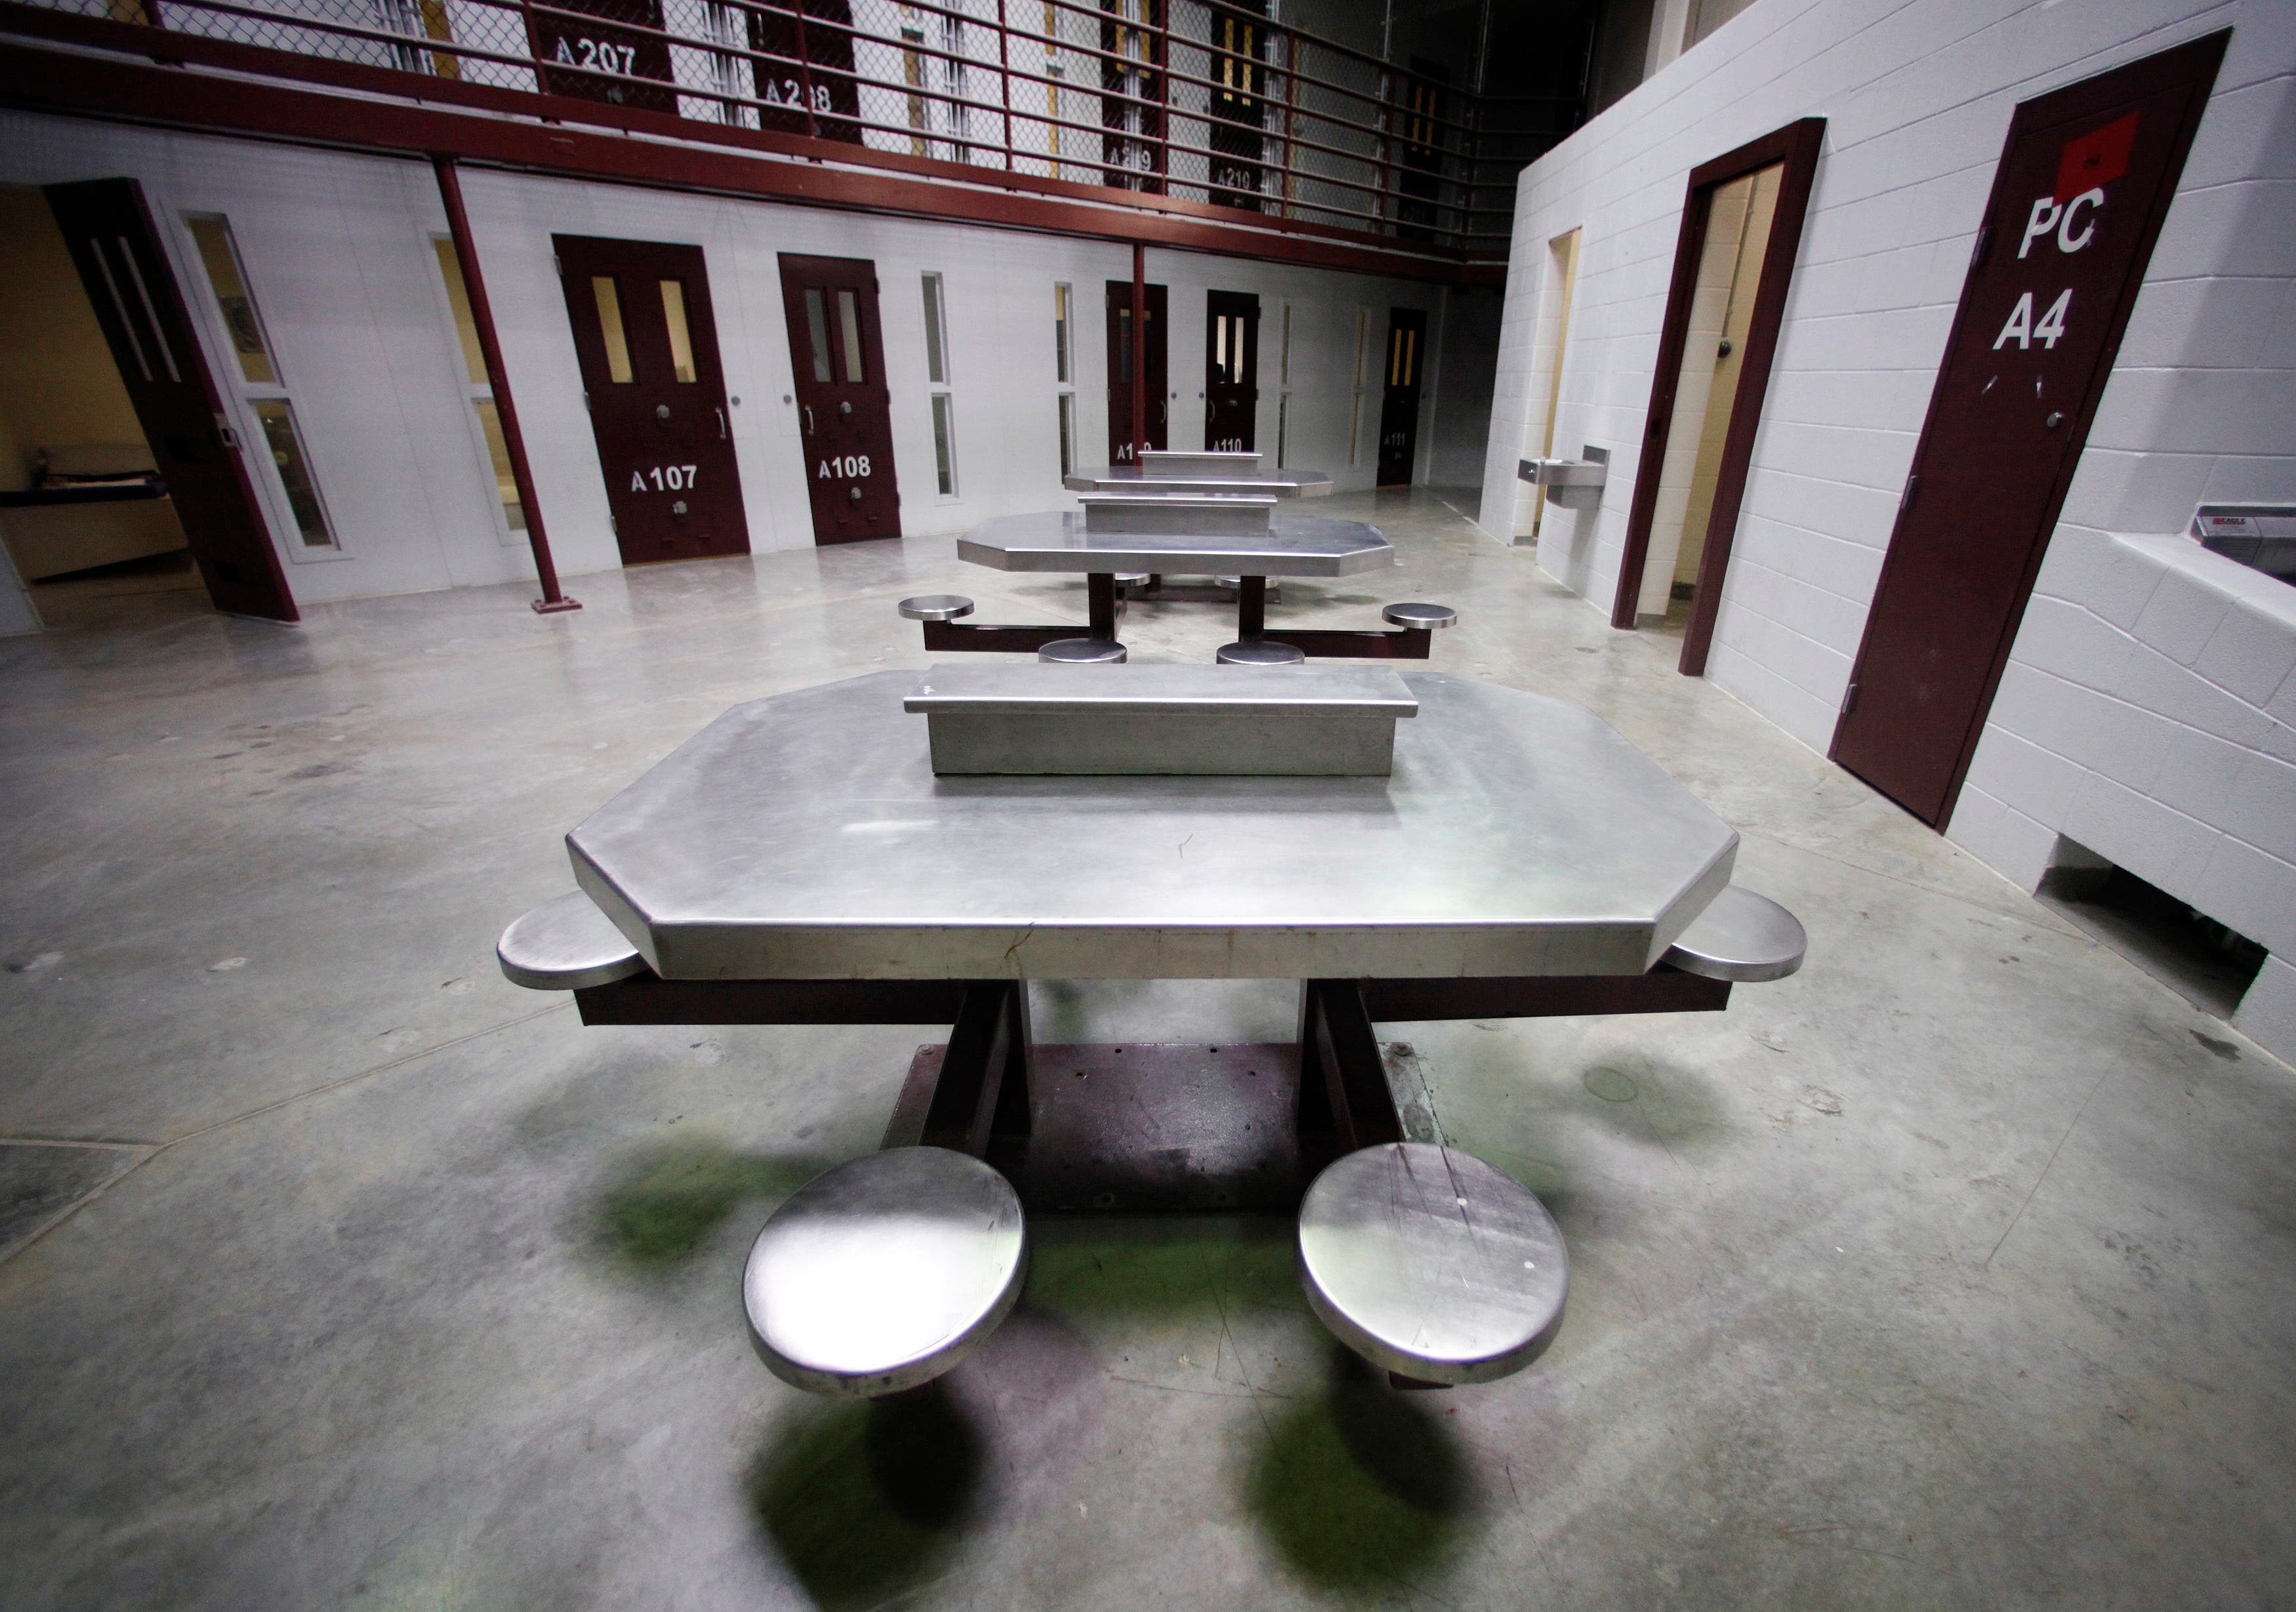 A cellblock at Camp VI, a prison used to house detainees at the U.S. Naval Base at Guantanamo Bay, pictured in March 2013. (File photo: Reuters)